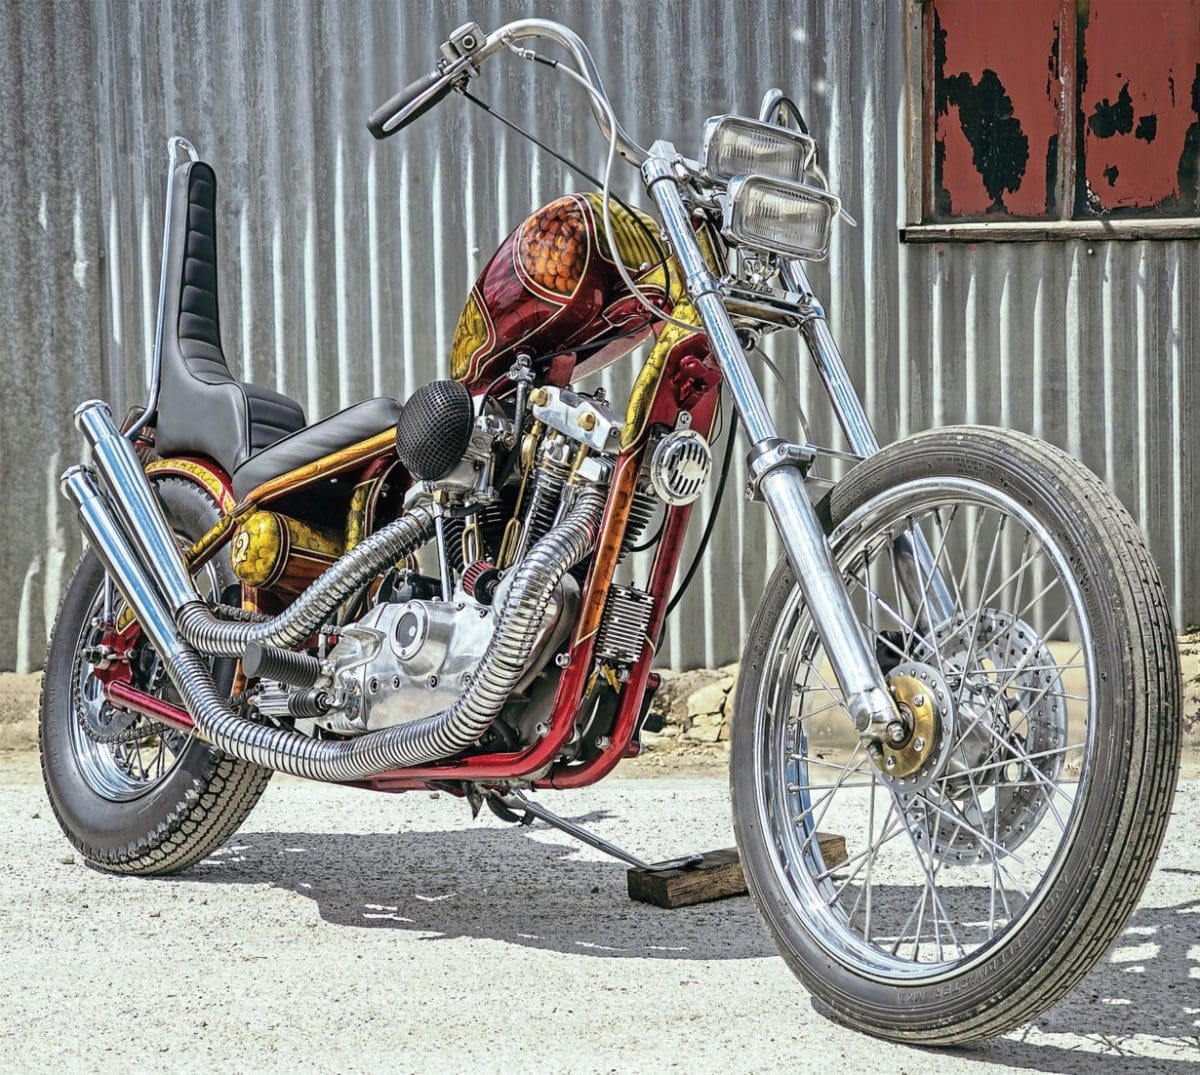 The Thing - 1970s old school chopper